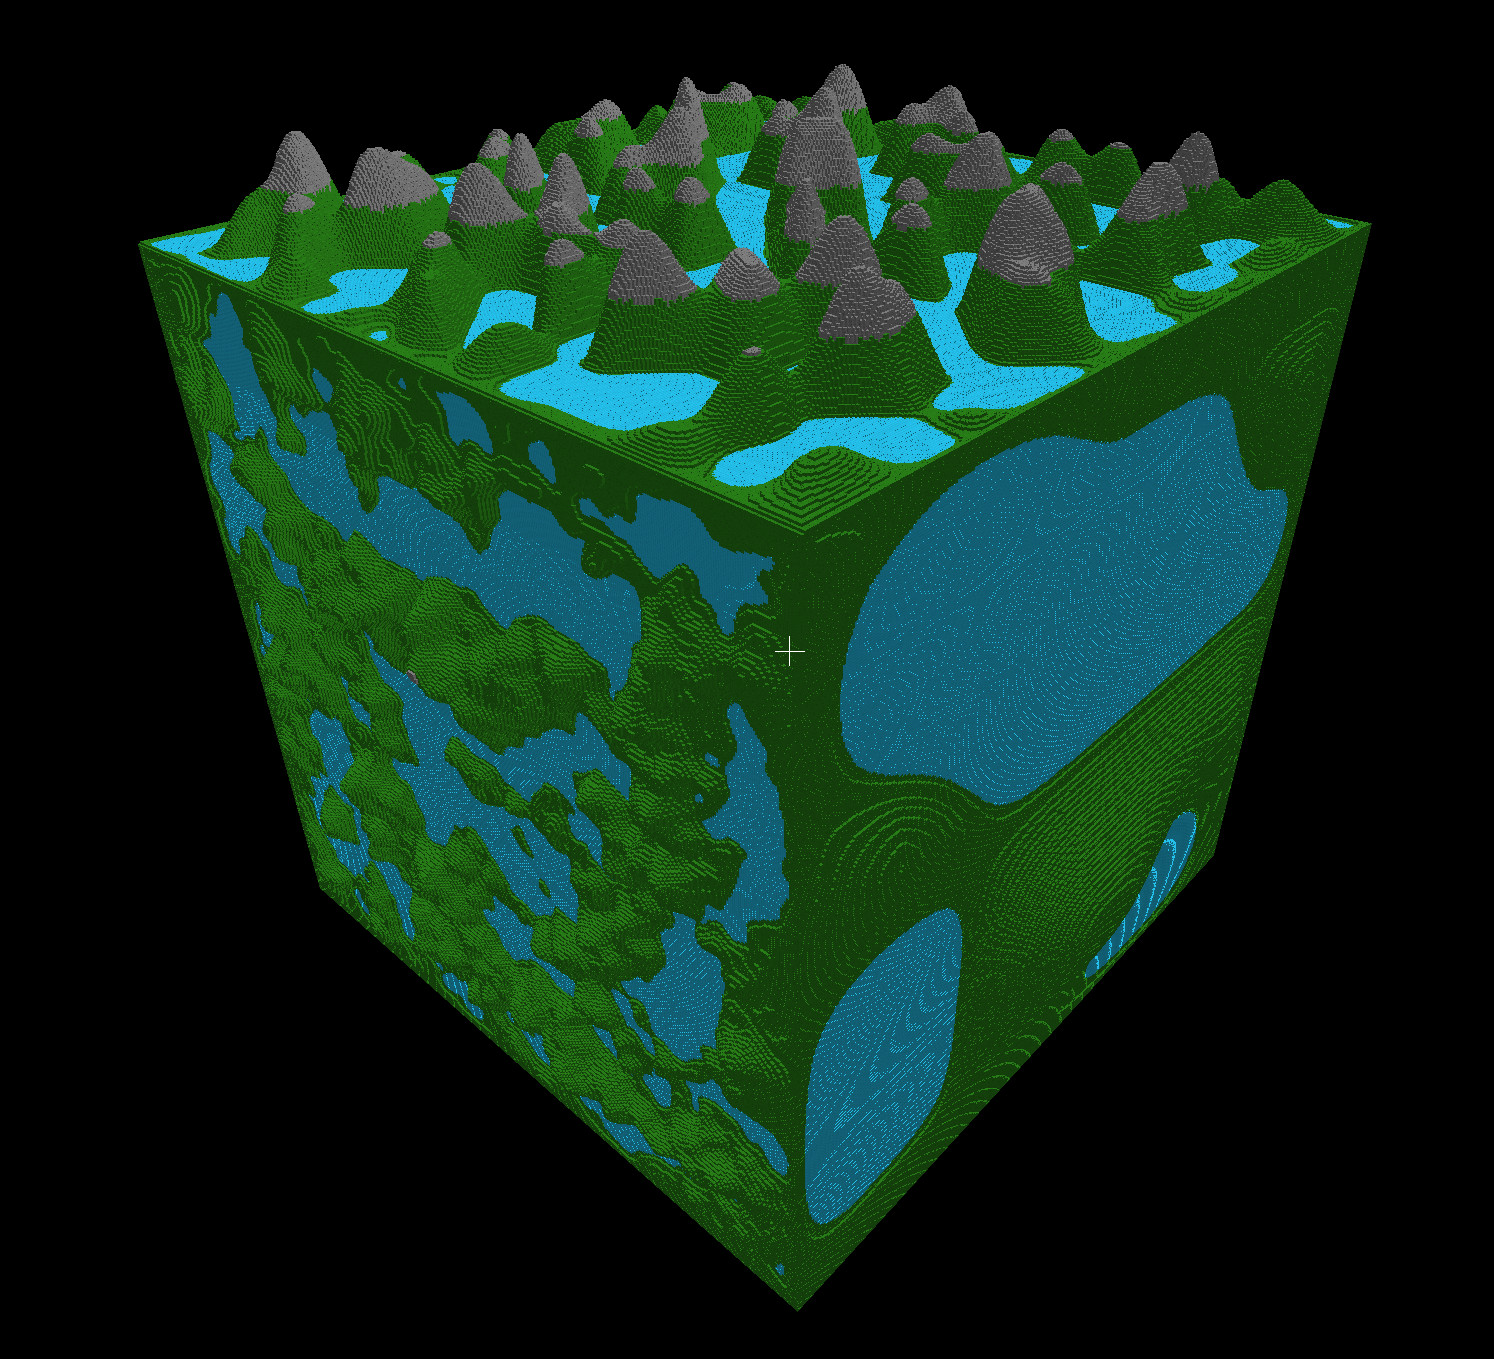 A procedurally generated cube world.